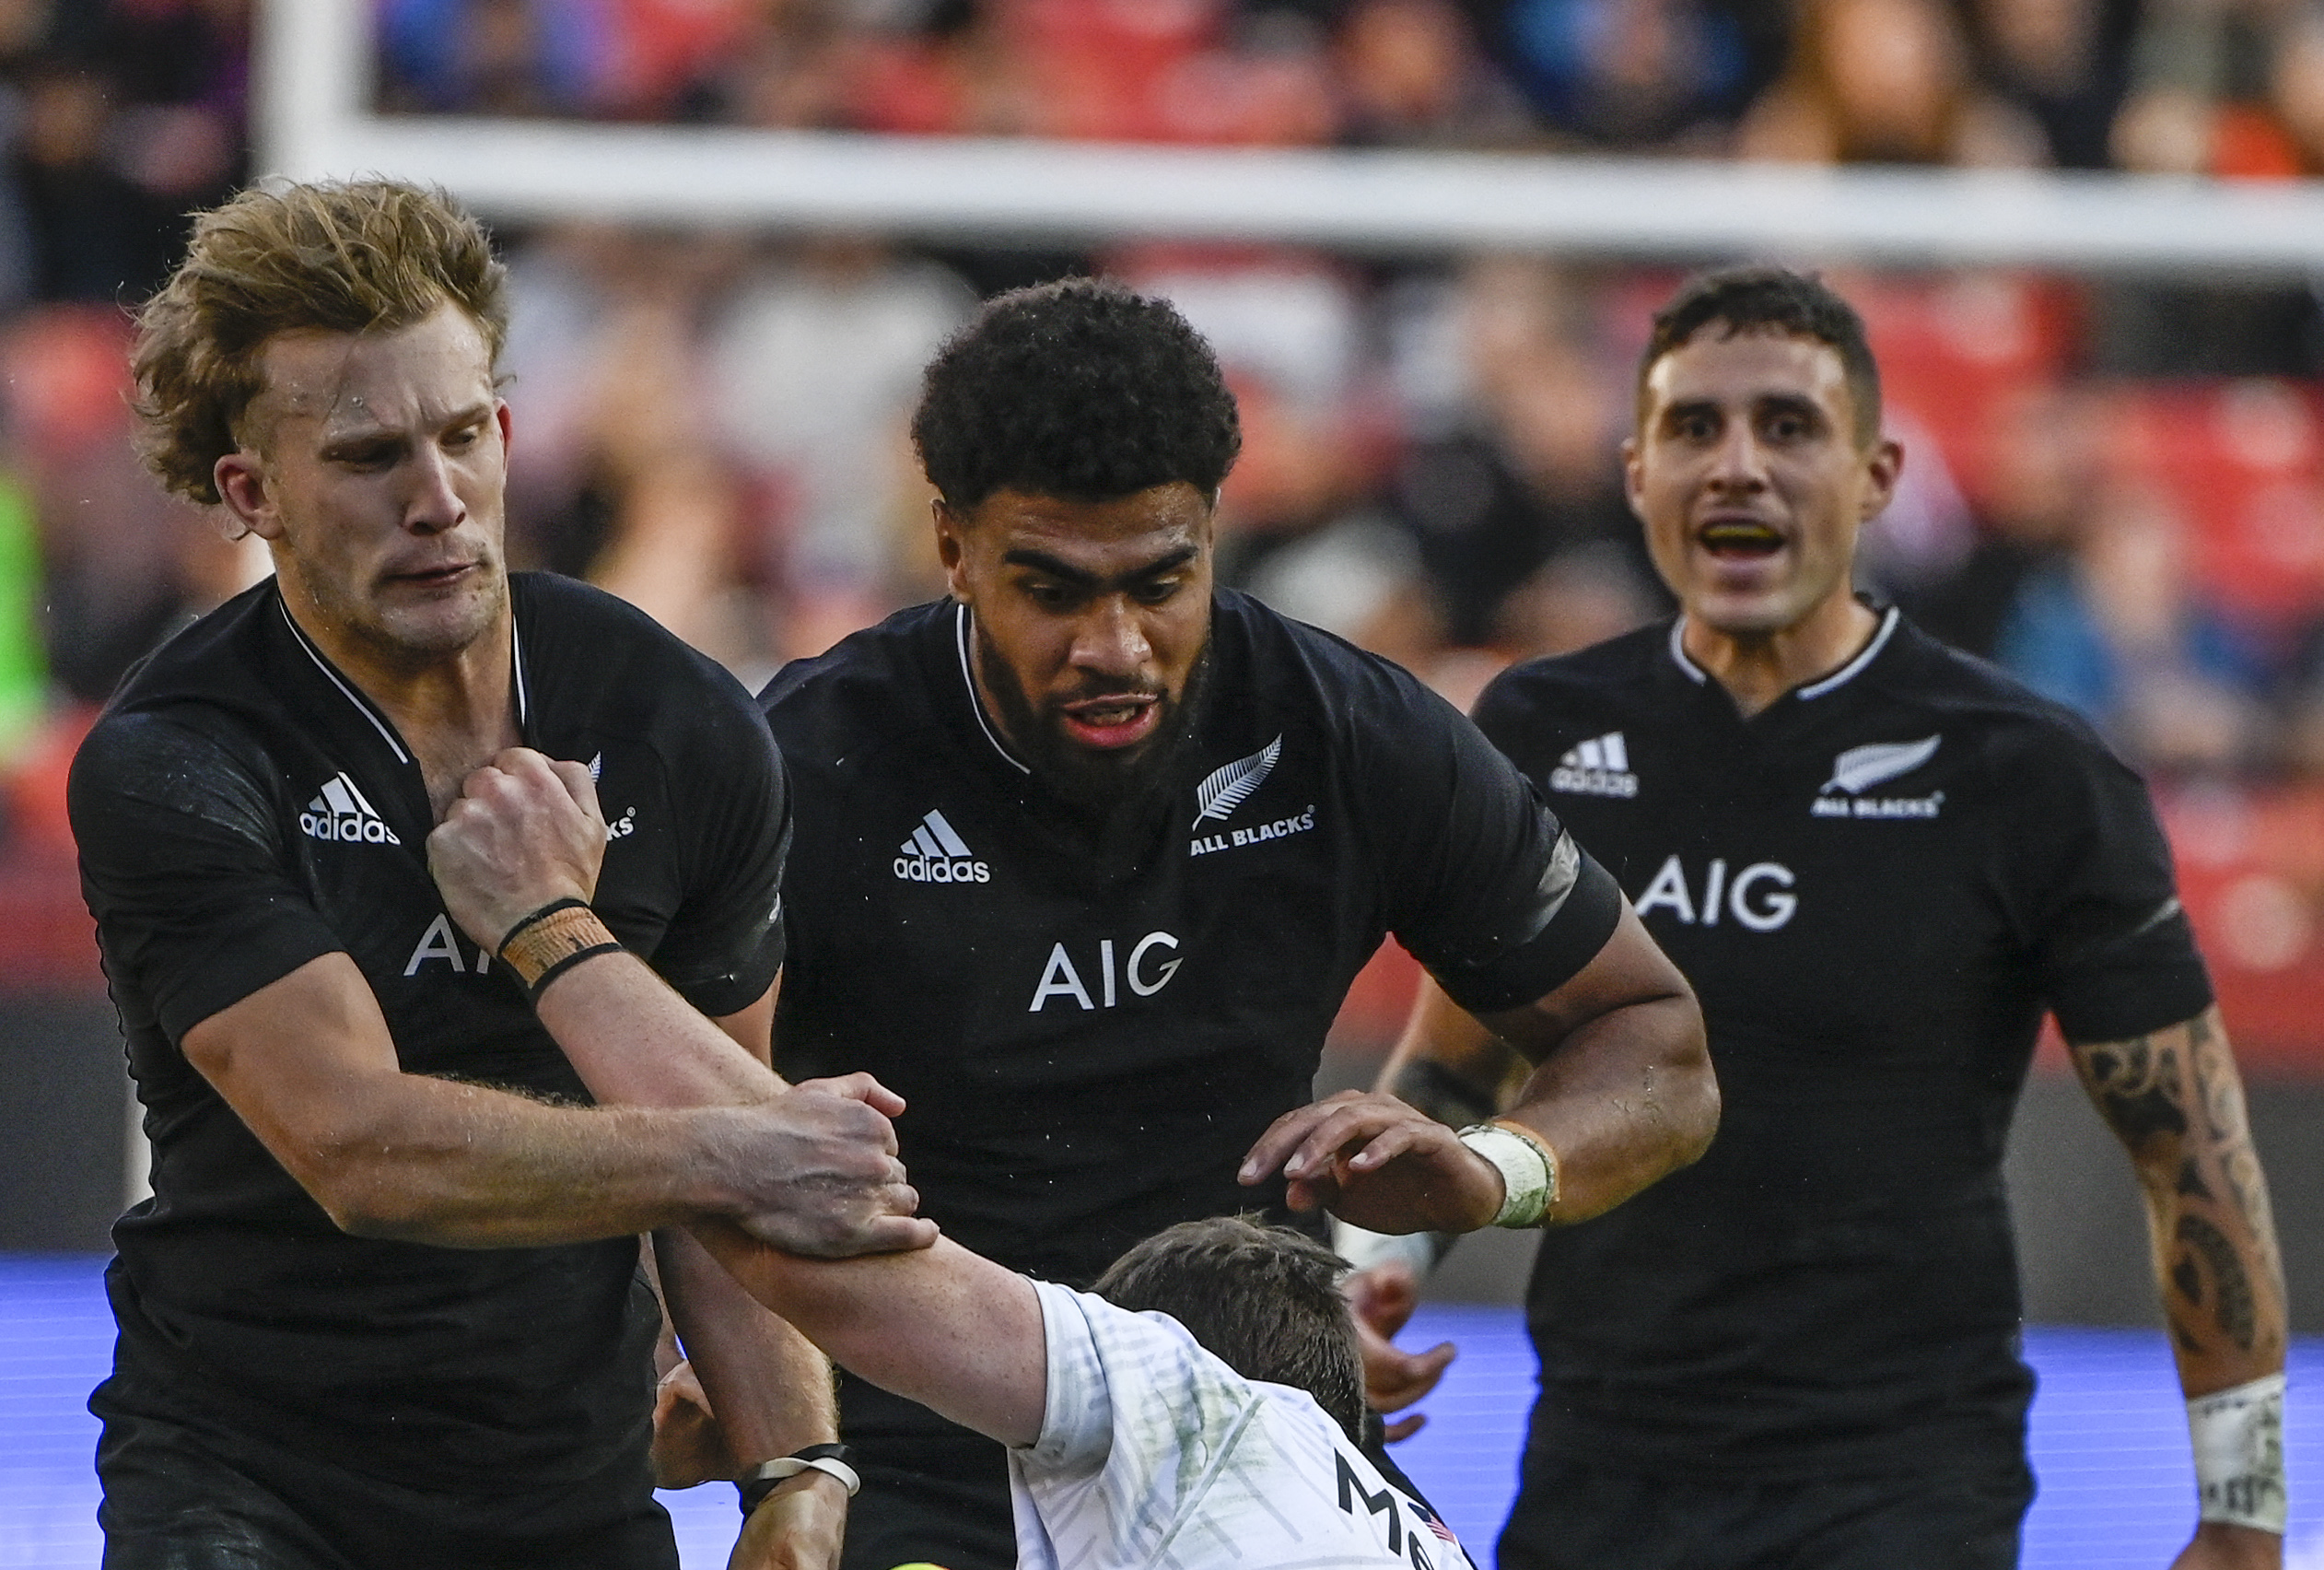 Places still up for grabs to face Wales » allblacks.com